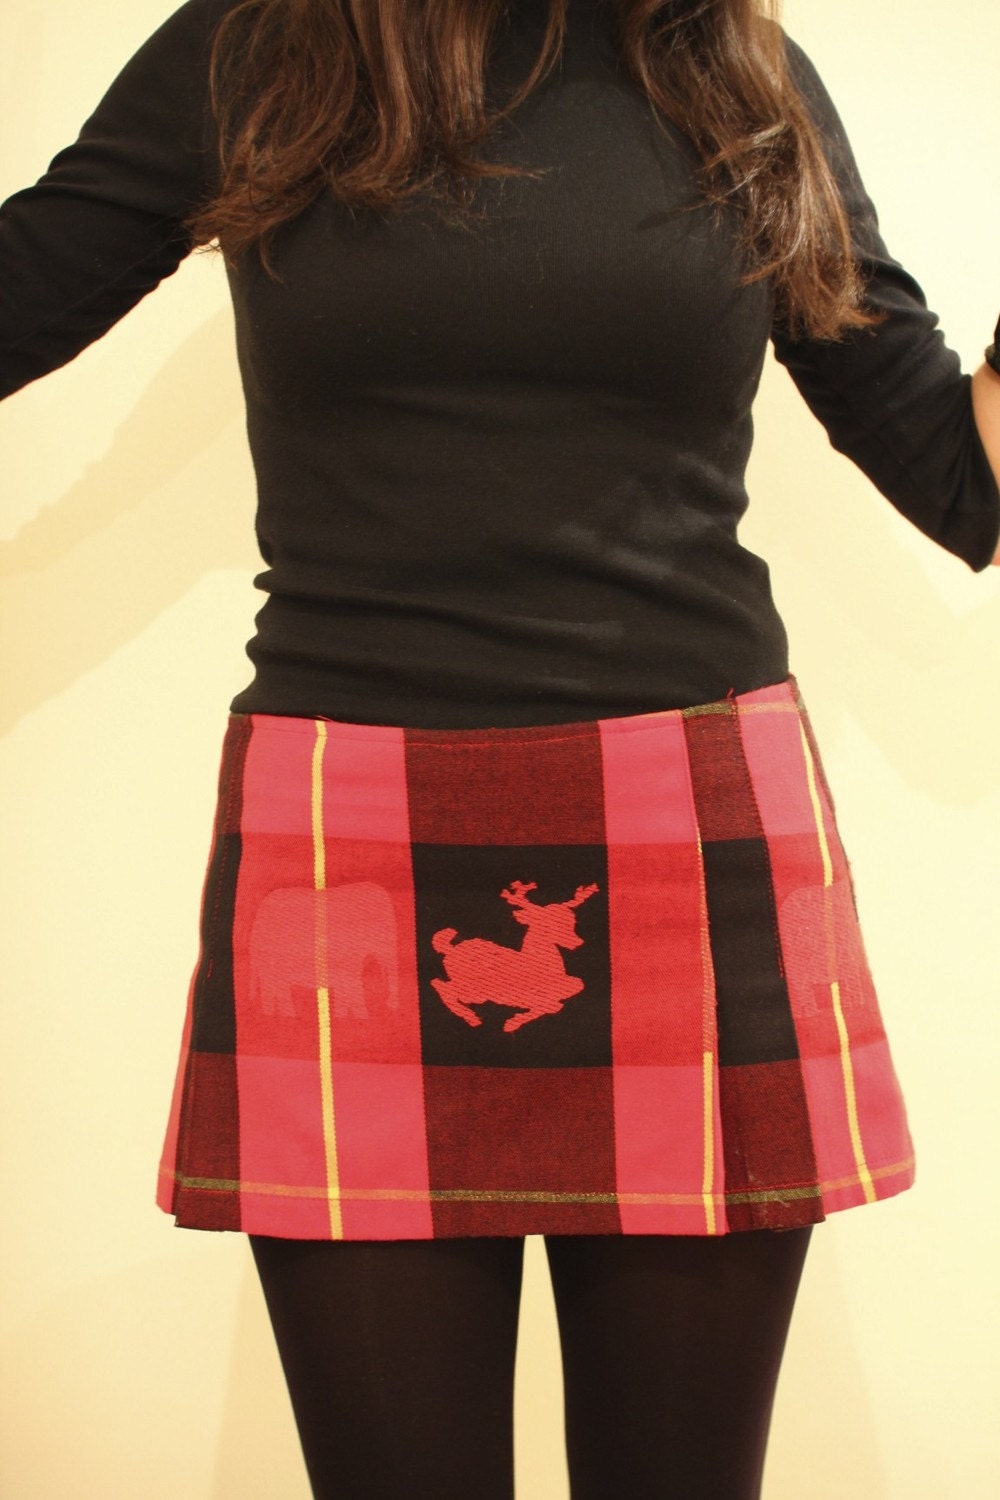 SALE SALE SALE (it was 25) red pleated mini skirt with deer and elephant apres ski